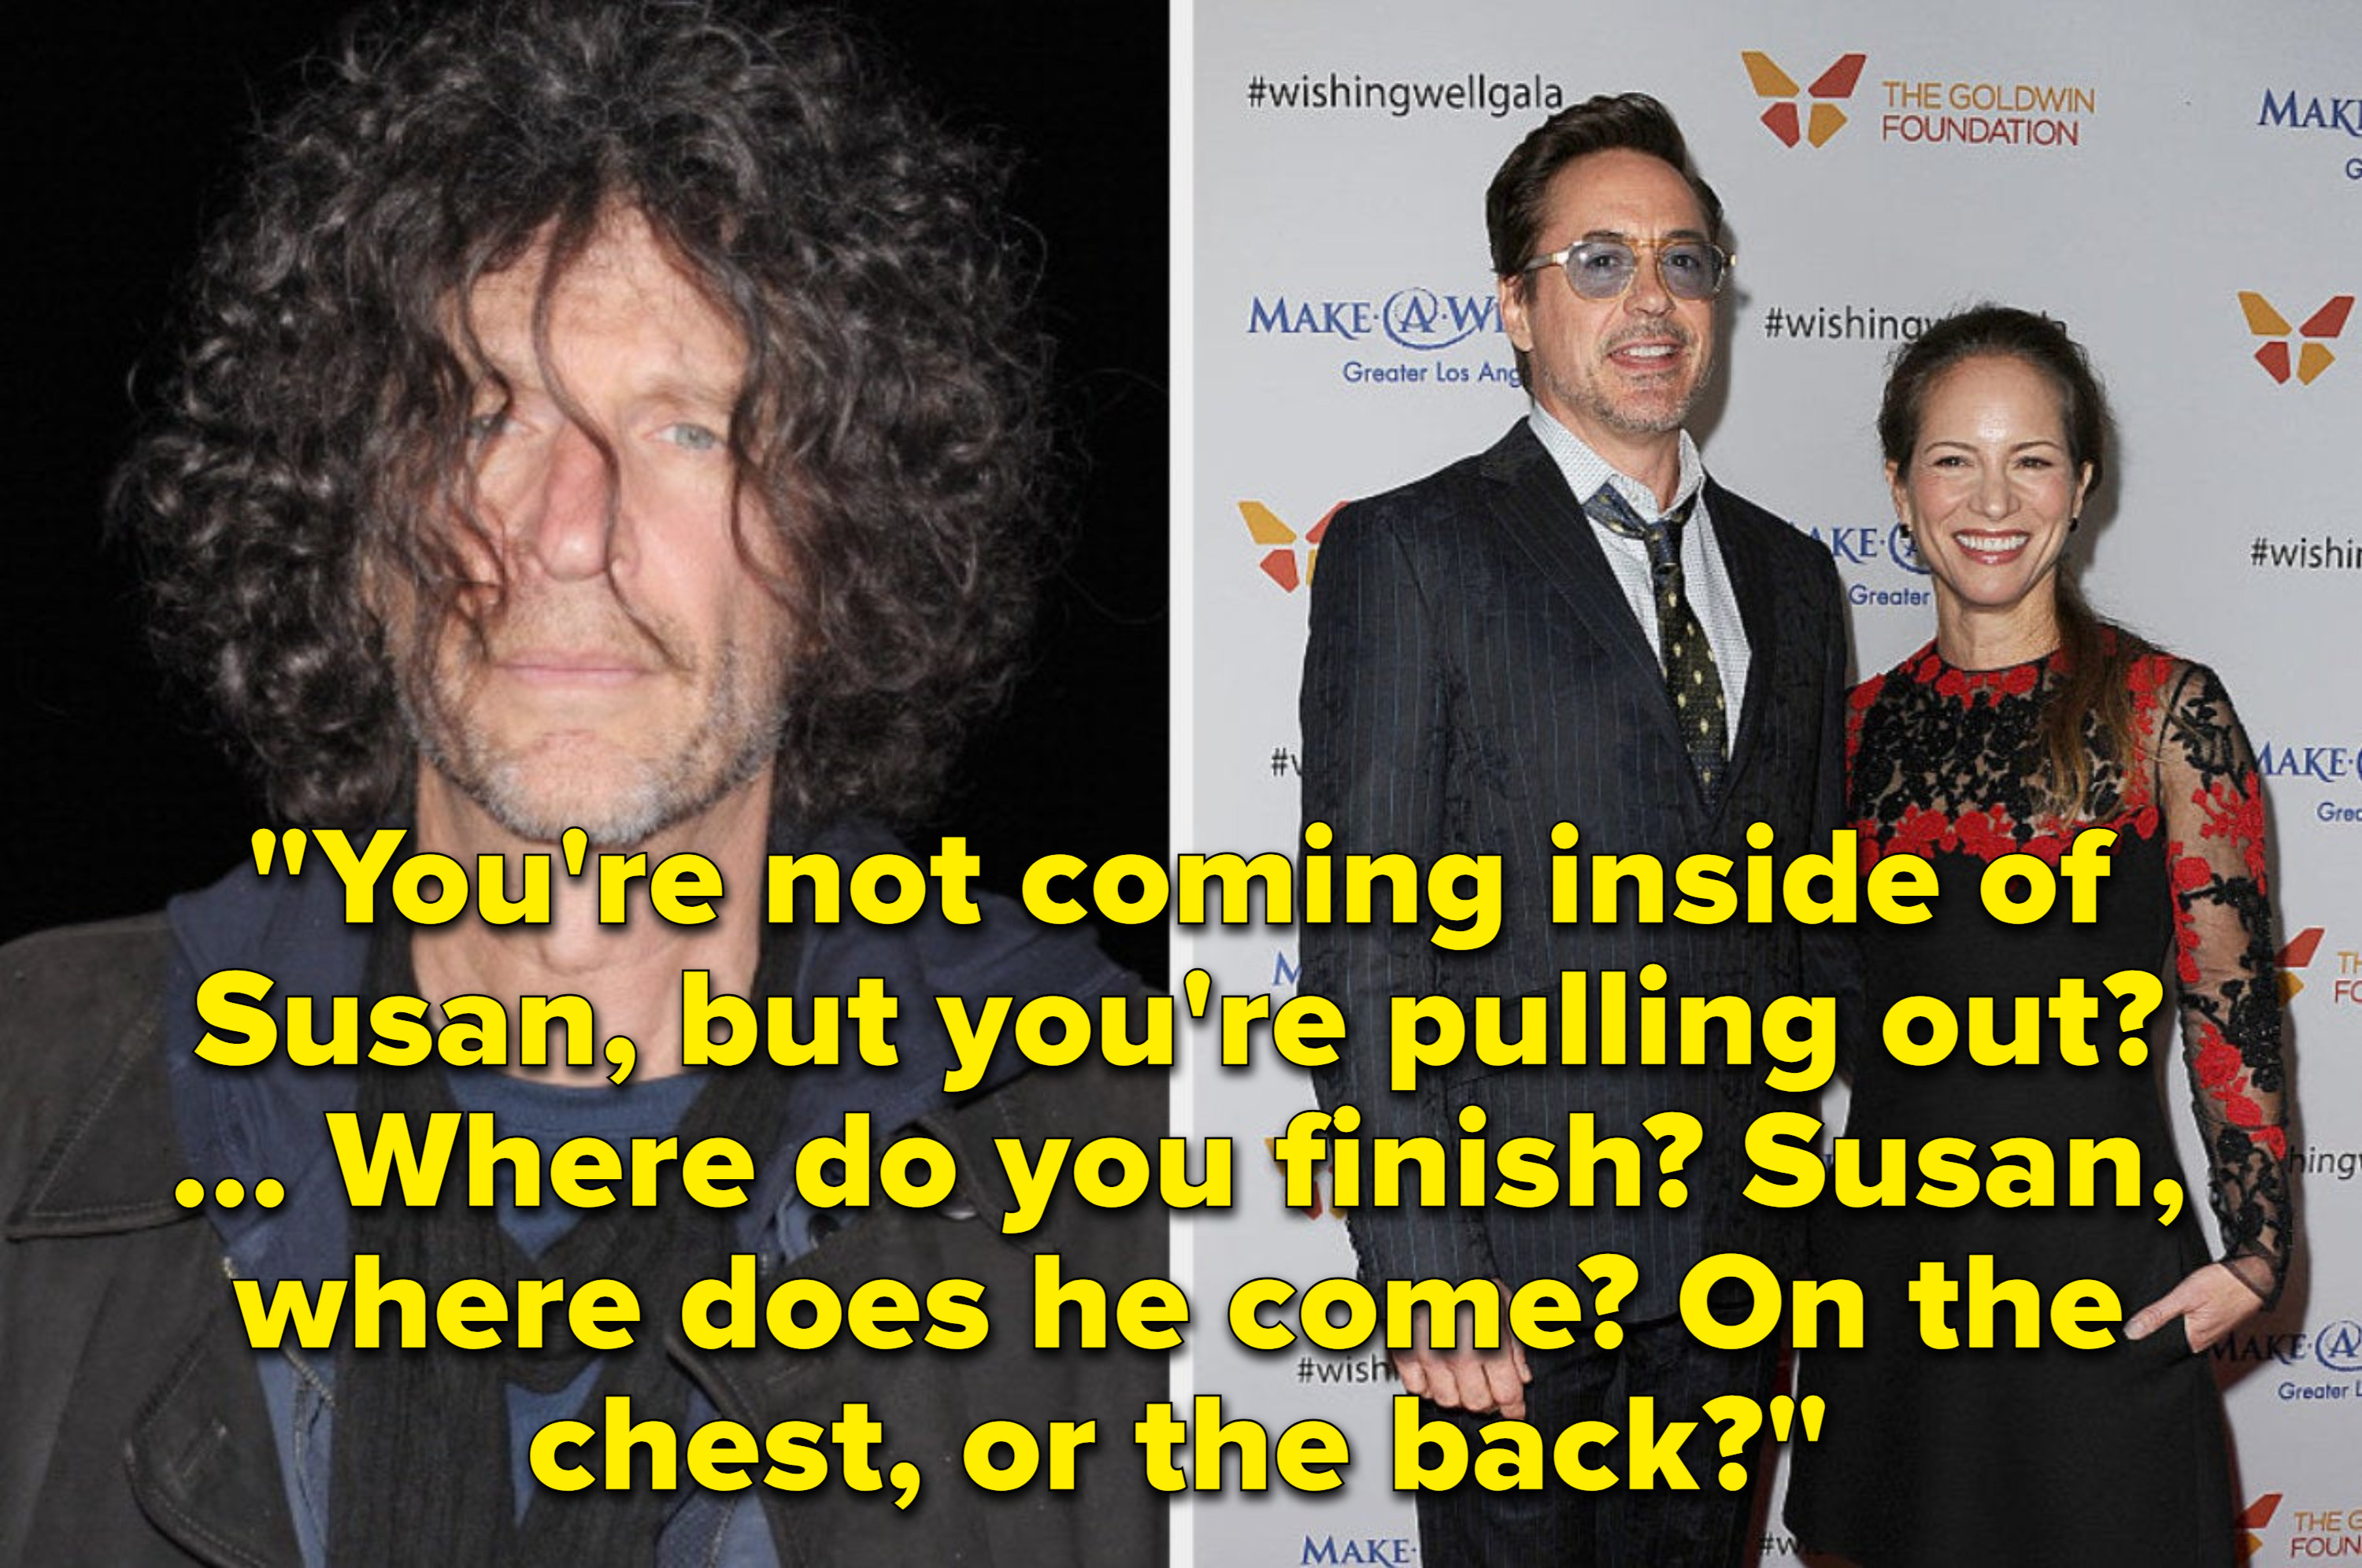 Howard&#x27;s comment: You&#x27;re not coming inside of Susan, but you&#x27;re pulling out? ... Where do you finish? Susan, where does he come? On the chest, or the back